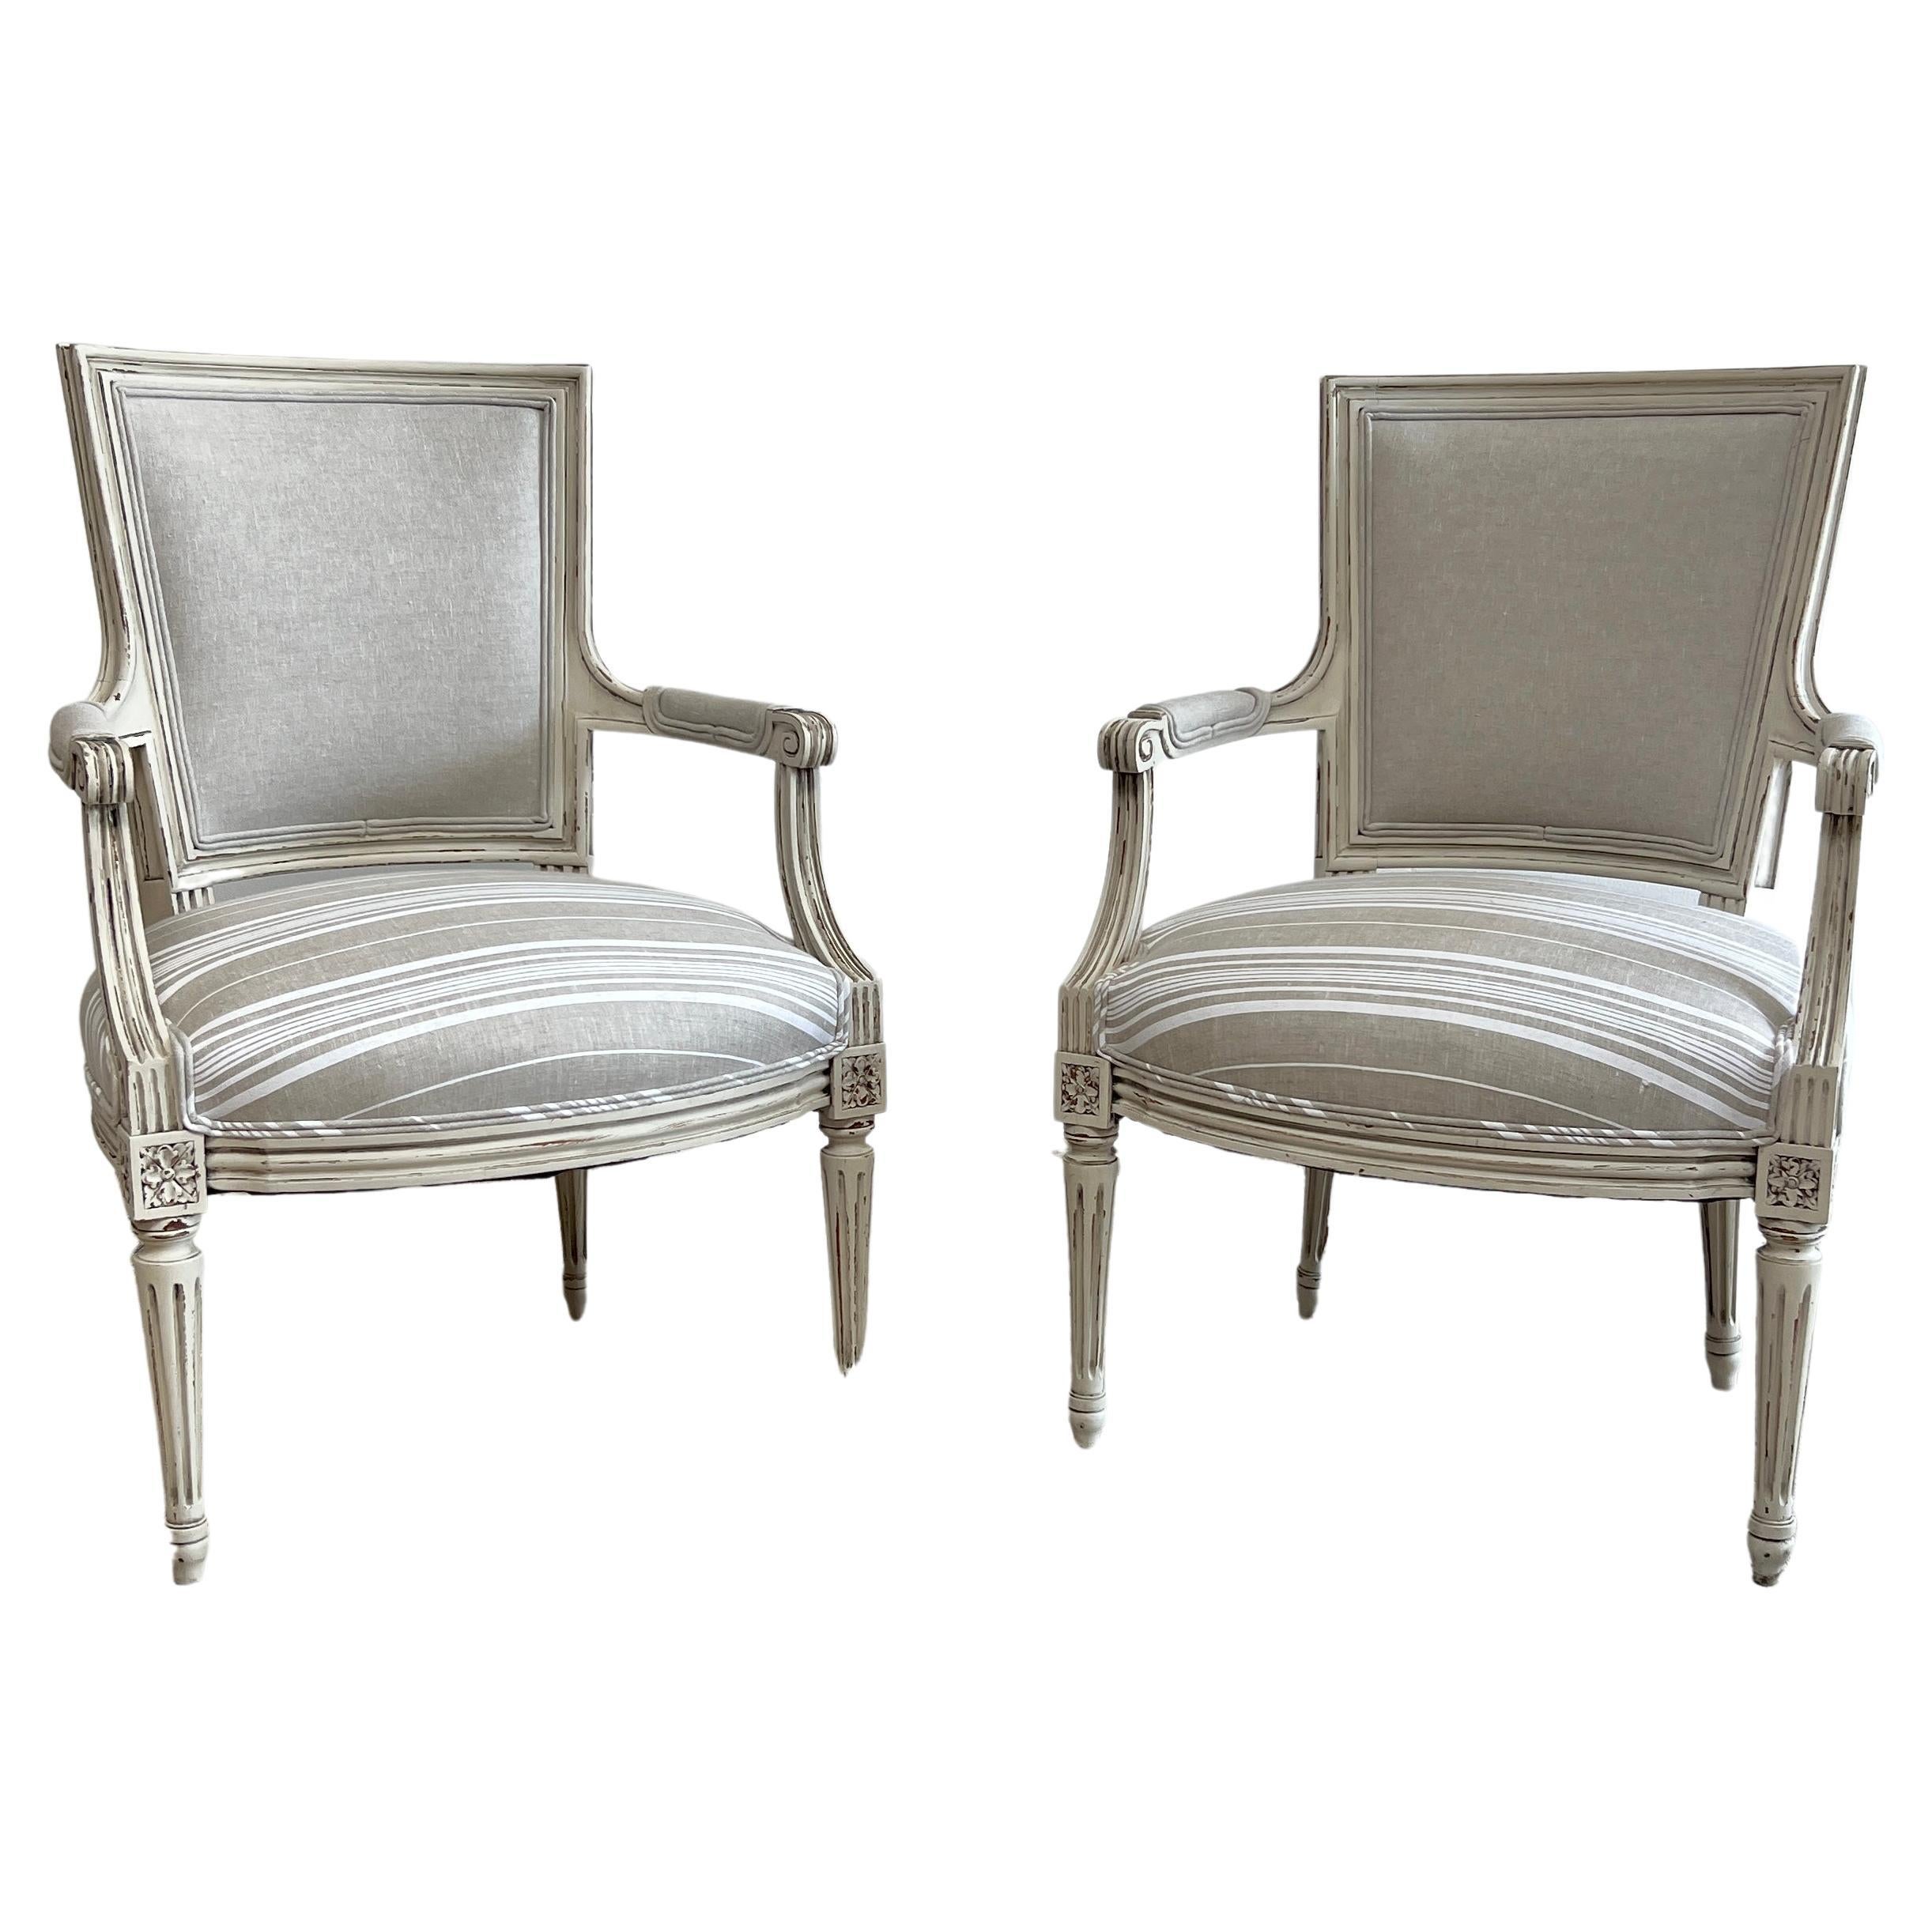 Vintage Pair of Painted and Upholstered French Louis XVI Style Open Arm Chairs